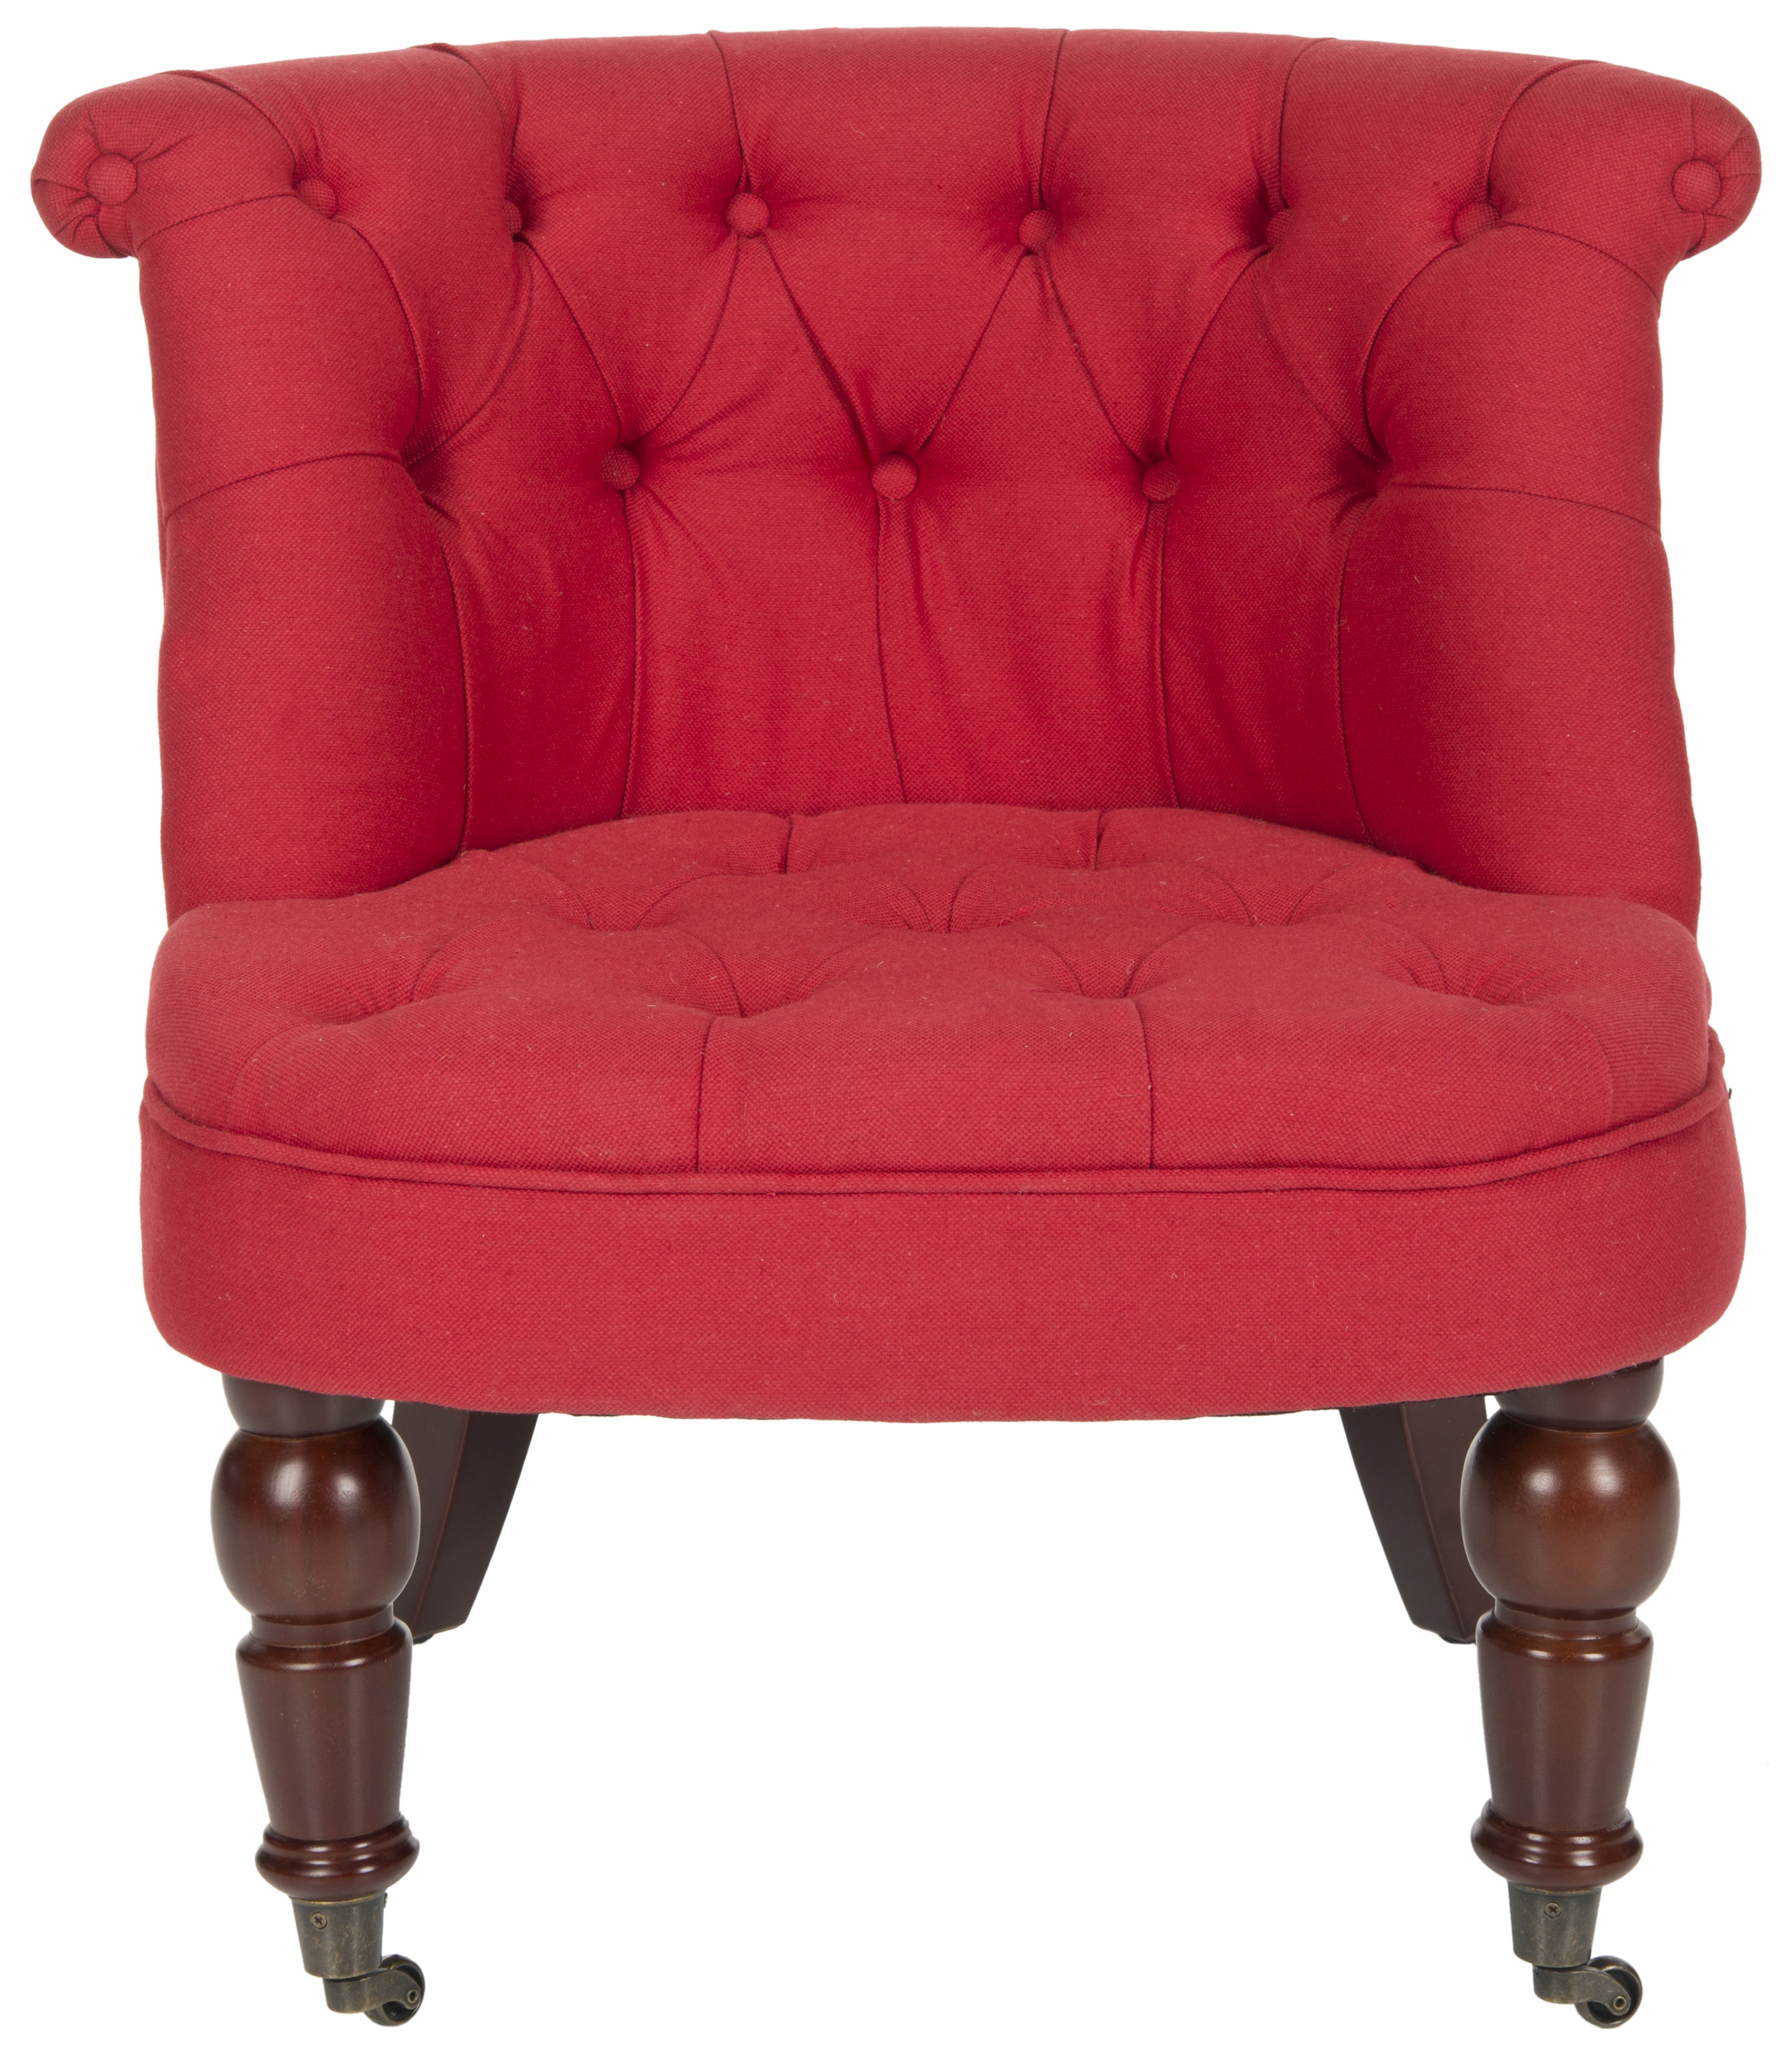 Carlin Tufted Chair - Cranberry/Cherry Mahogany - Arlo Home - Image 0